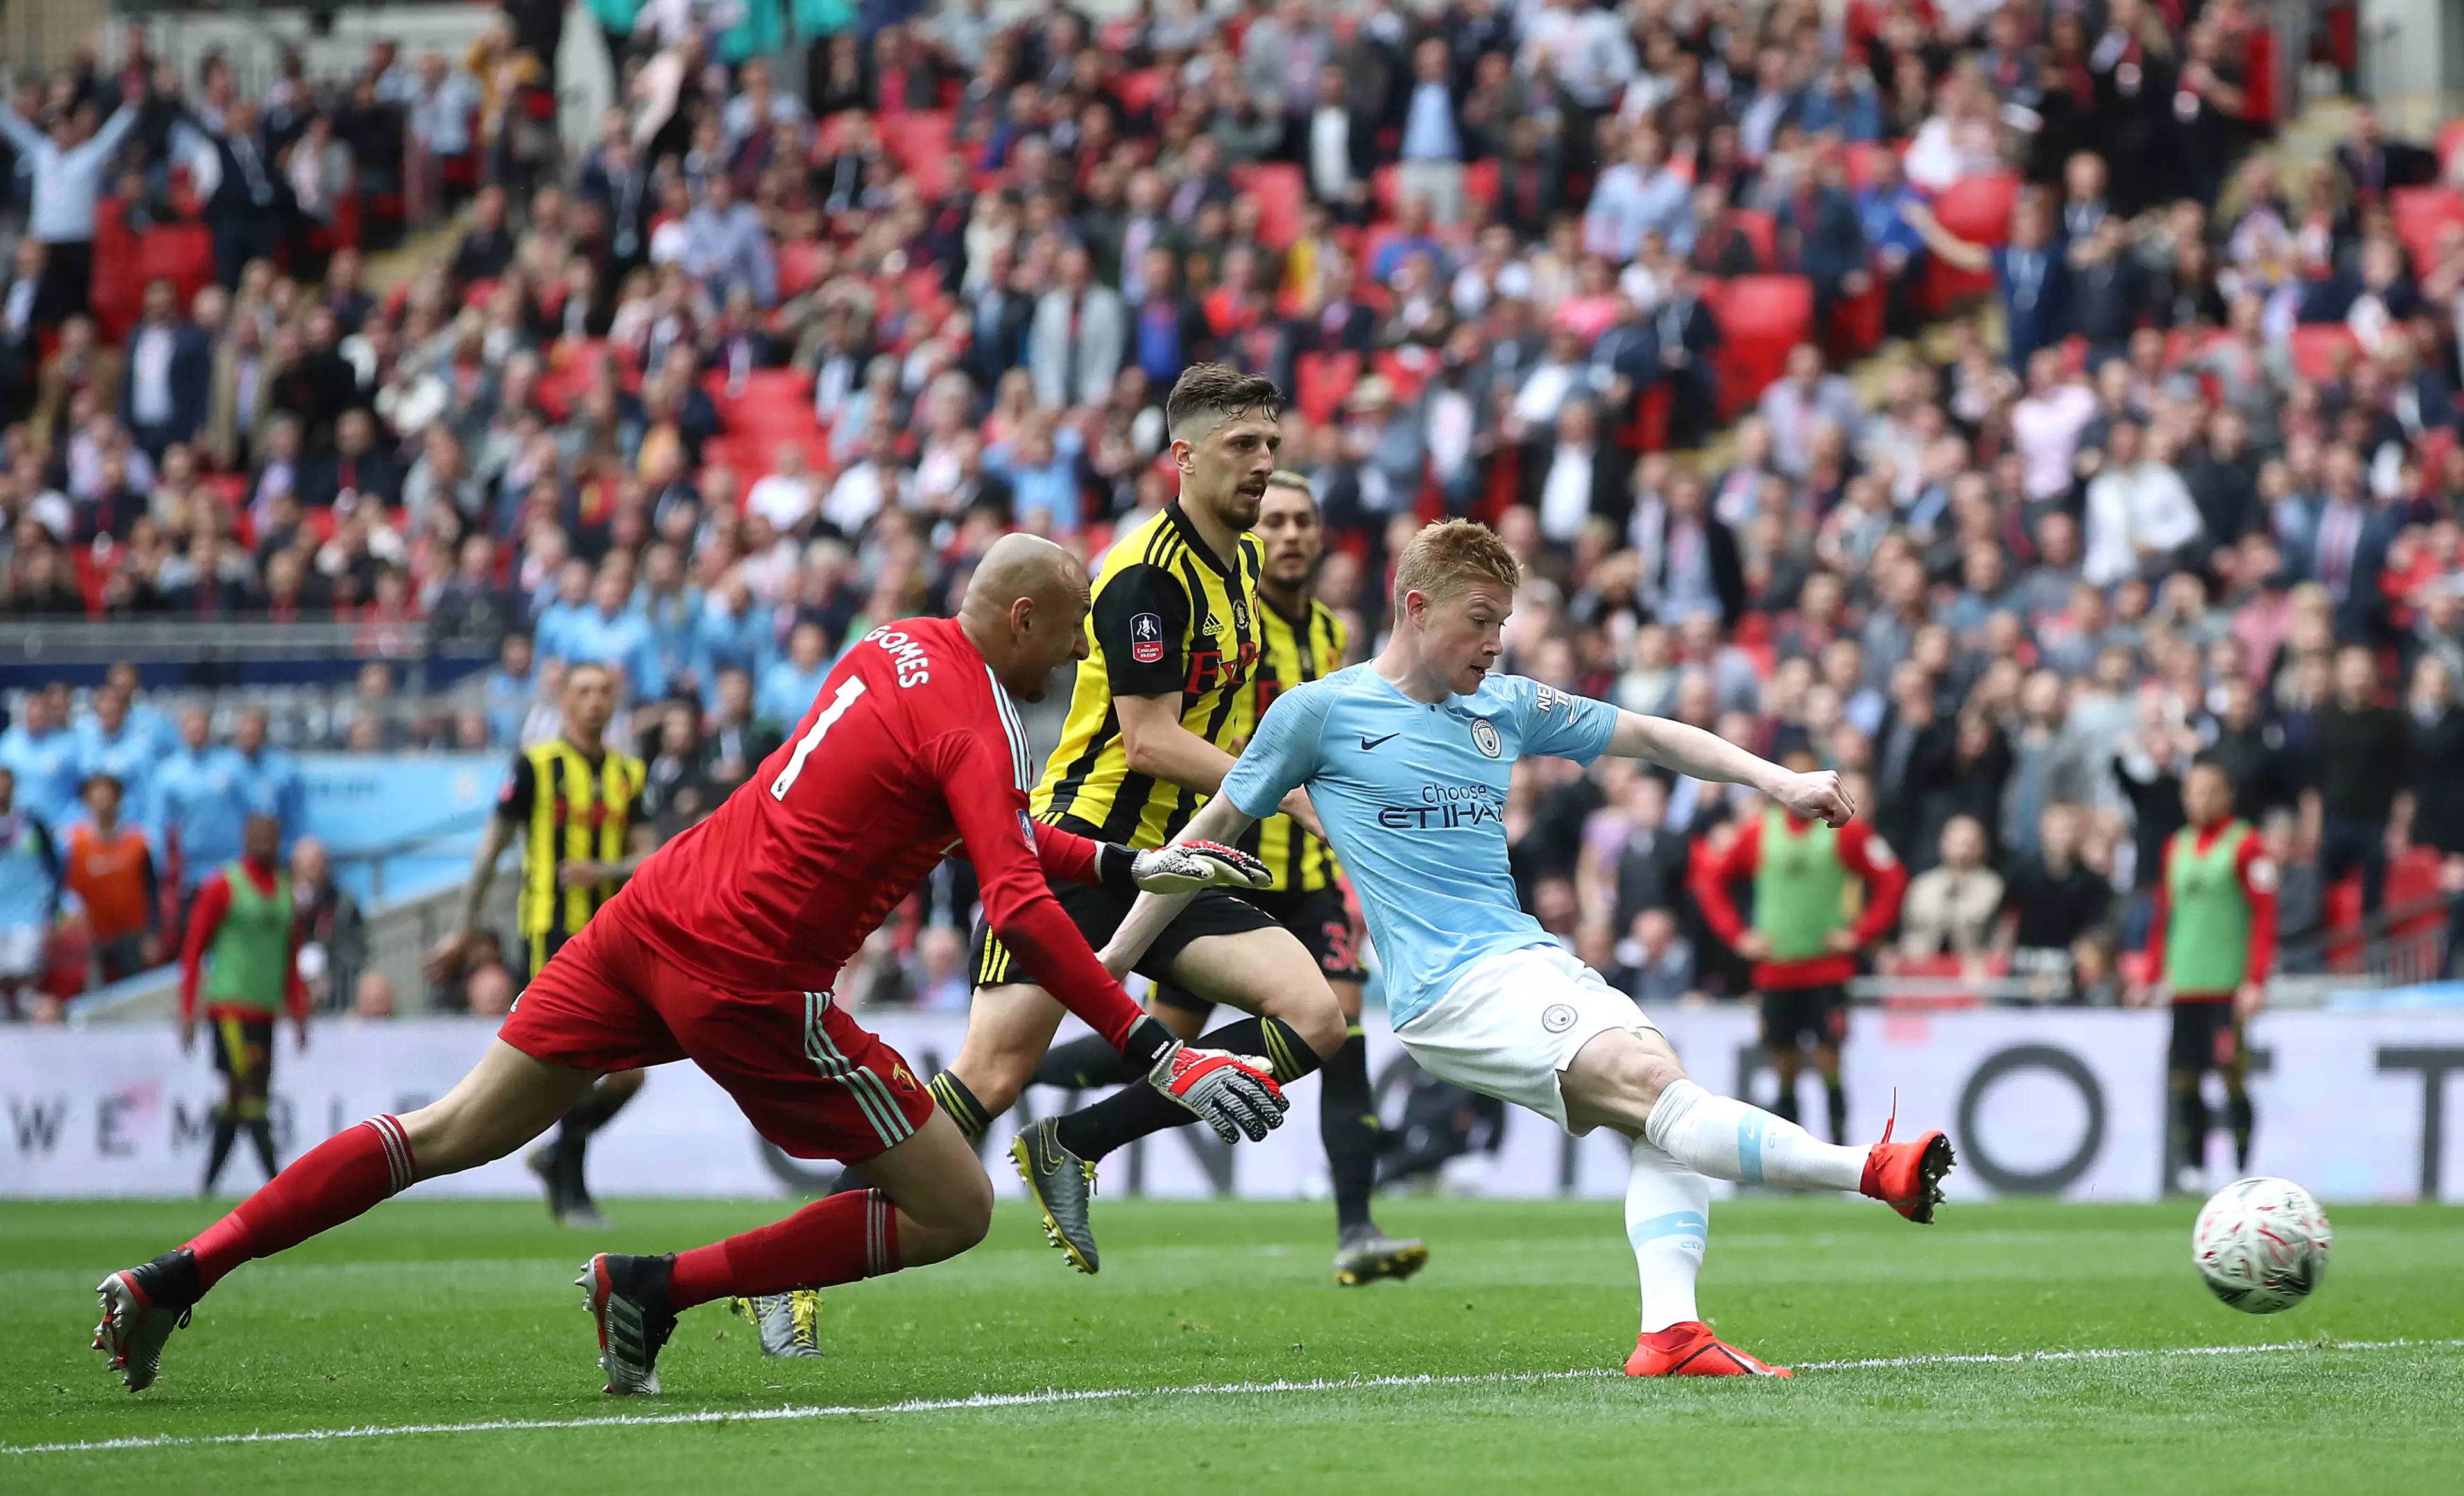 Kevin De Bruyne was named as part of an all-Manchester City midfield